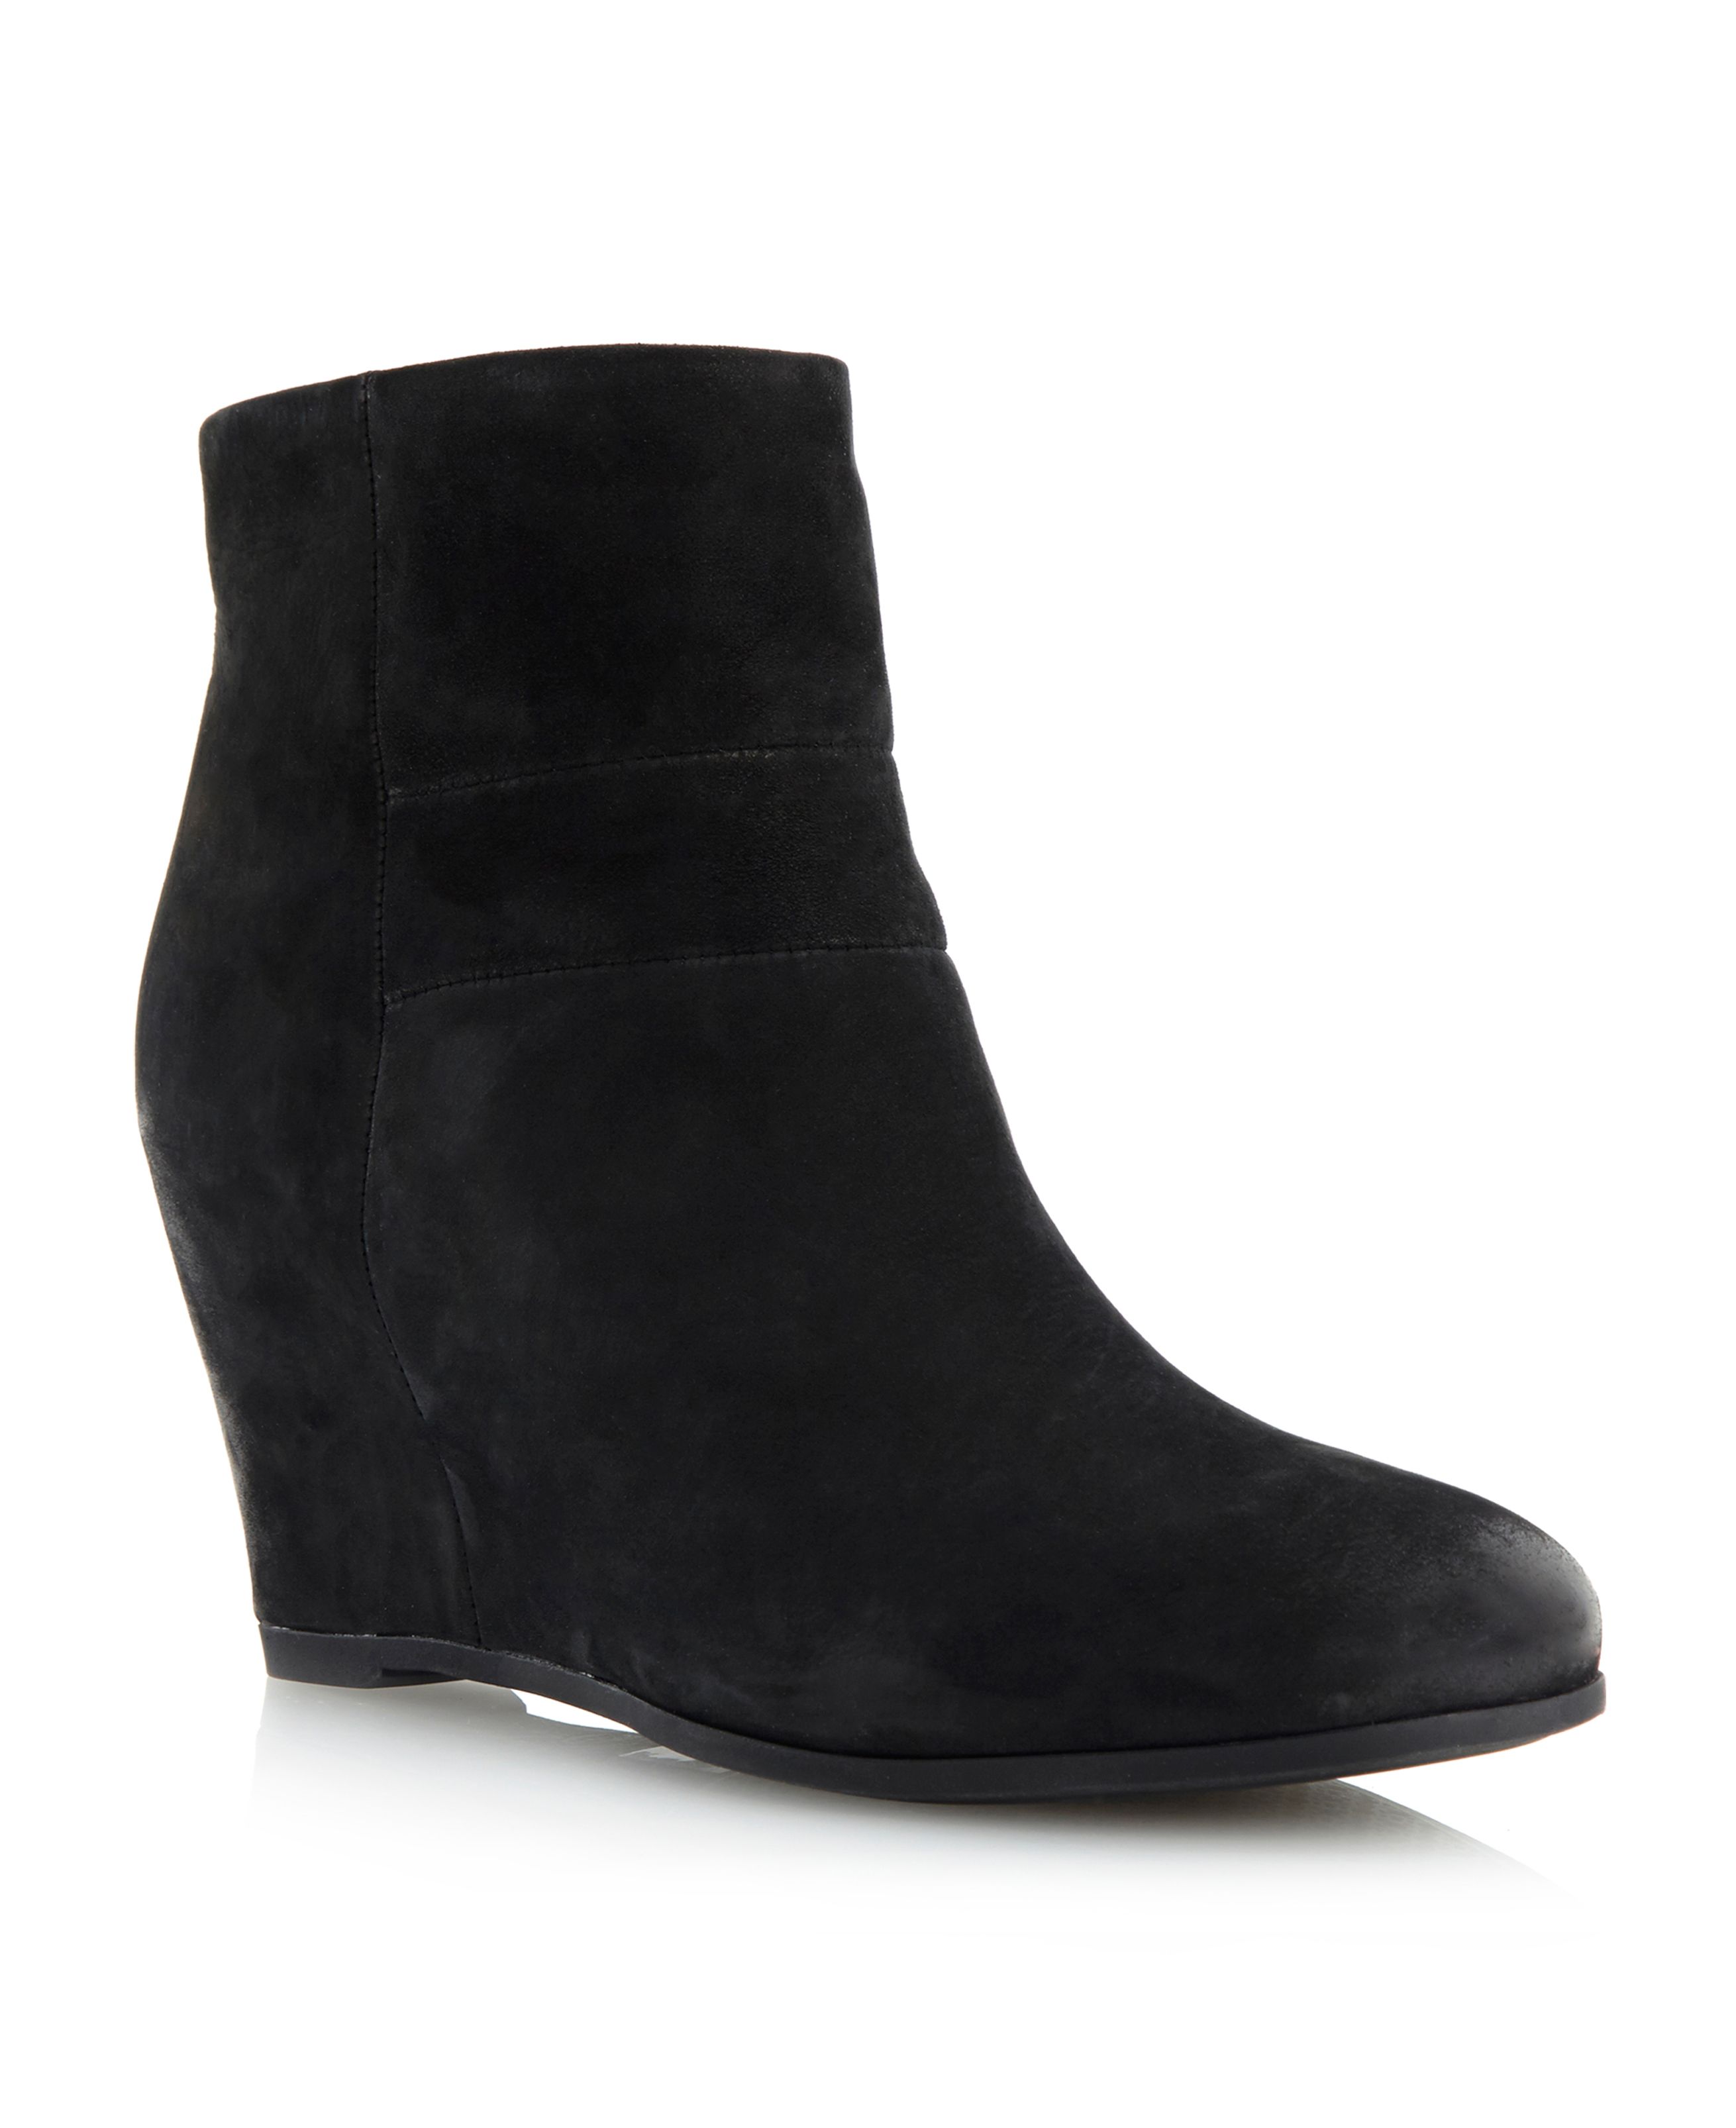 Geox Ultraviolet D34-Side Strap Wedge Ankle Boots in Black | Lyst